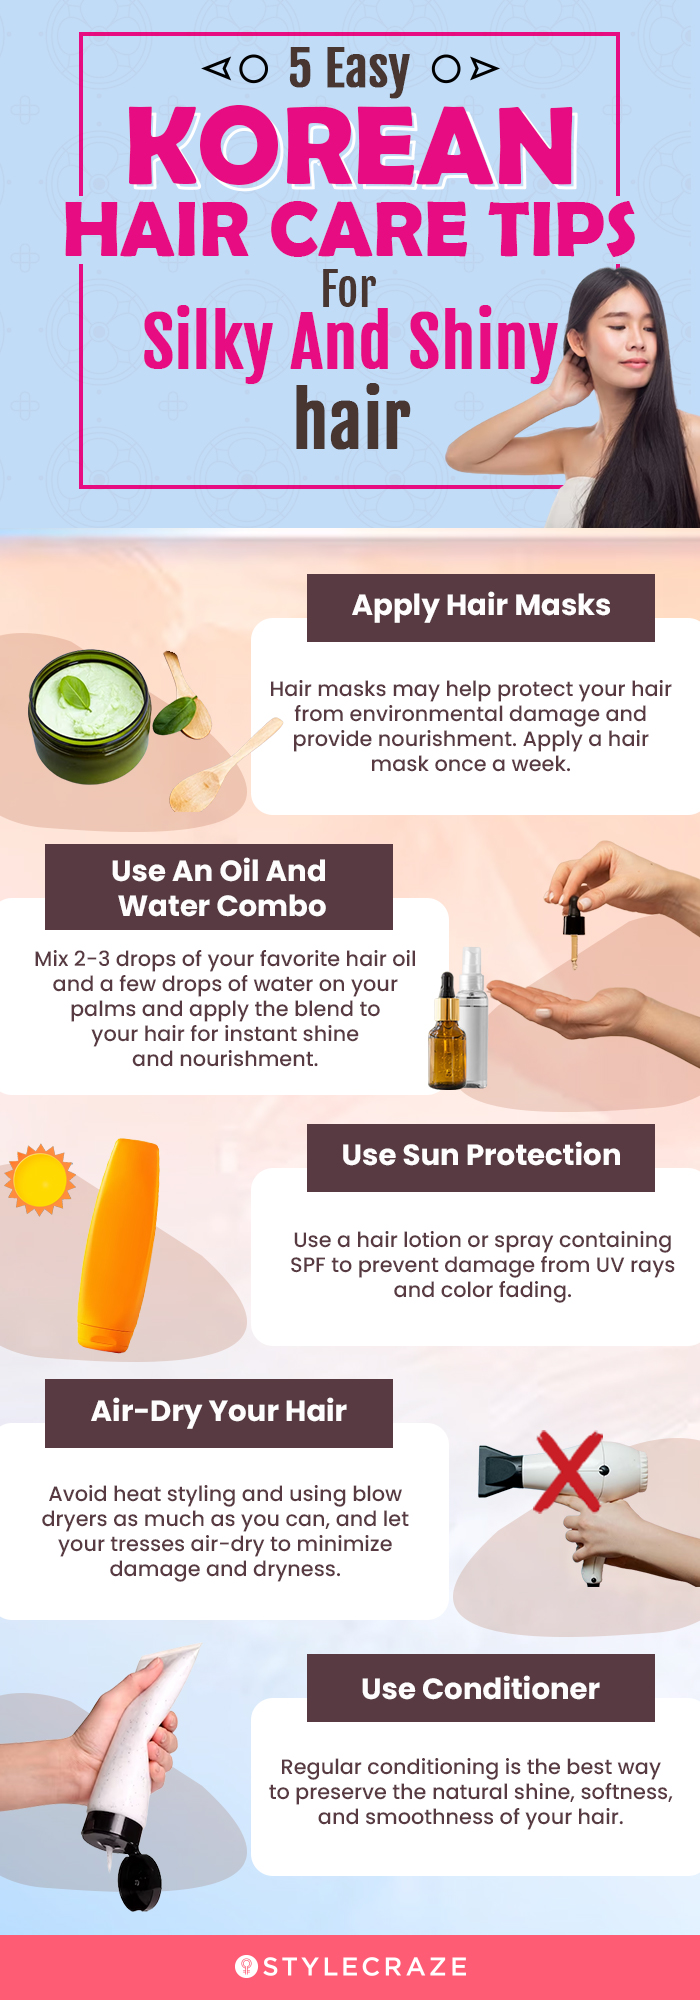 5 easy korean hair care tips for silky and shiny hair (infographic)